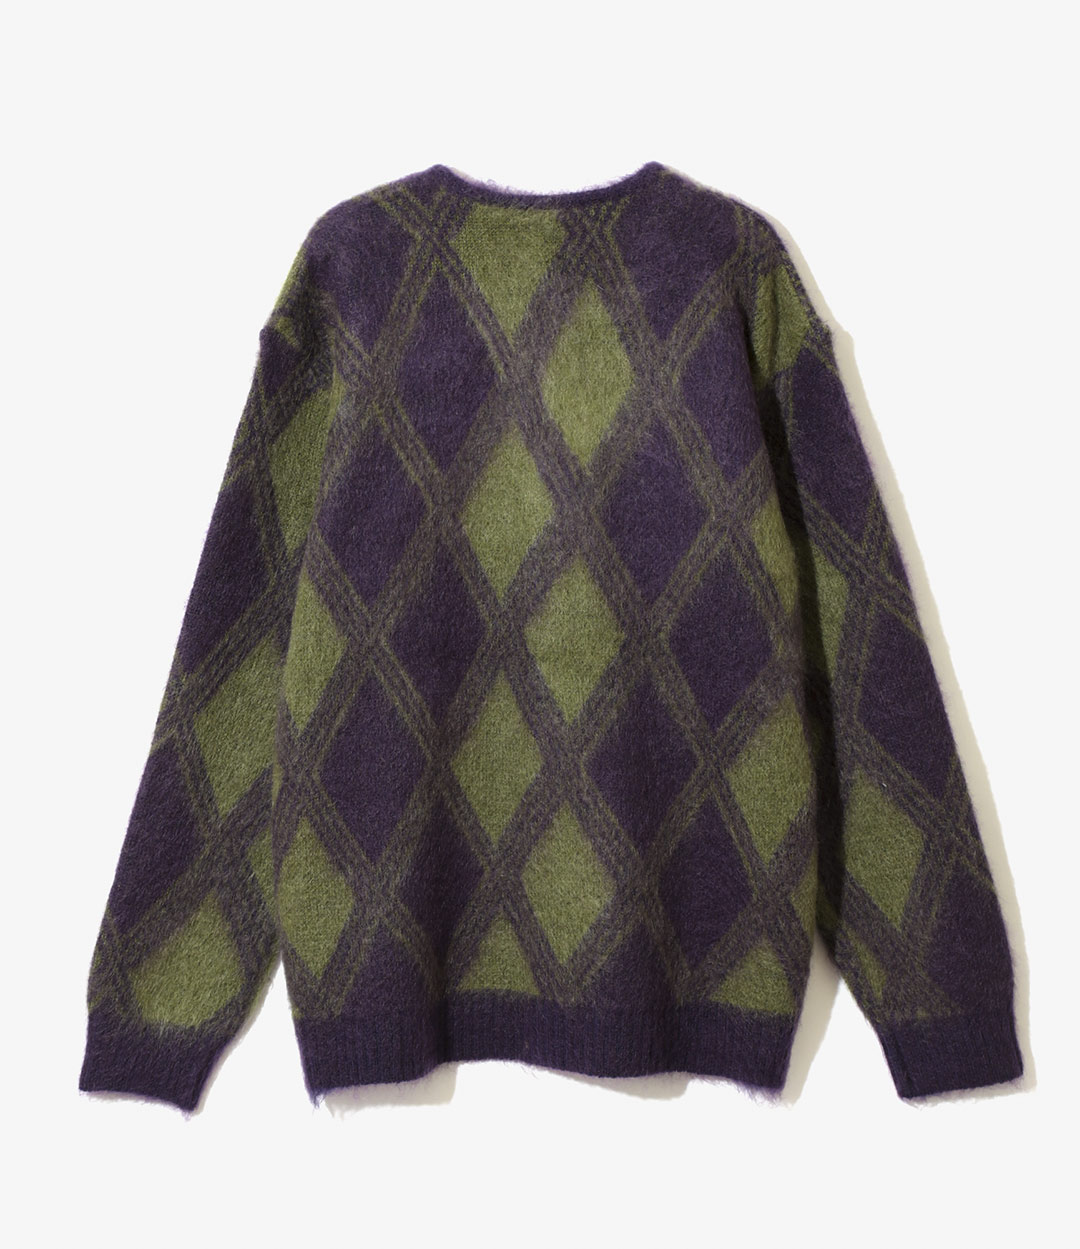 NEEDLES〉 MOHAIR CARDIGAN今季展開の全5パターンが到着 | NEPENTHES 